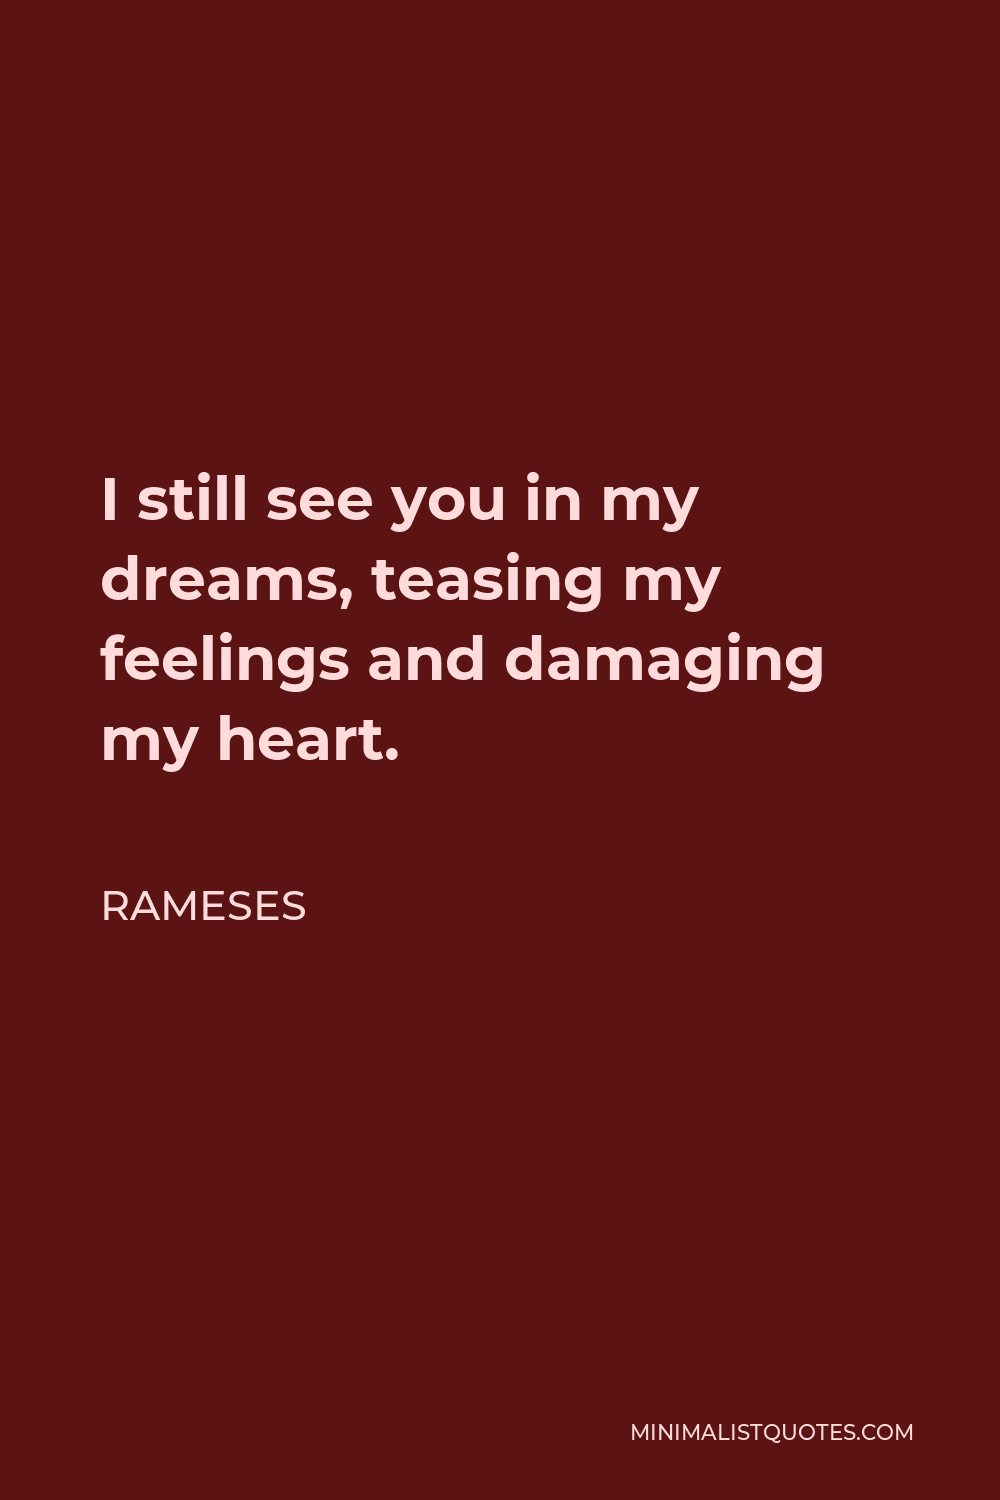 Rameses Quote - I still see you in my dreams, teasing my feelings and damaging my heart.